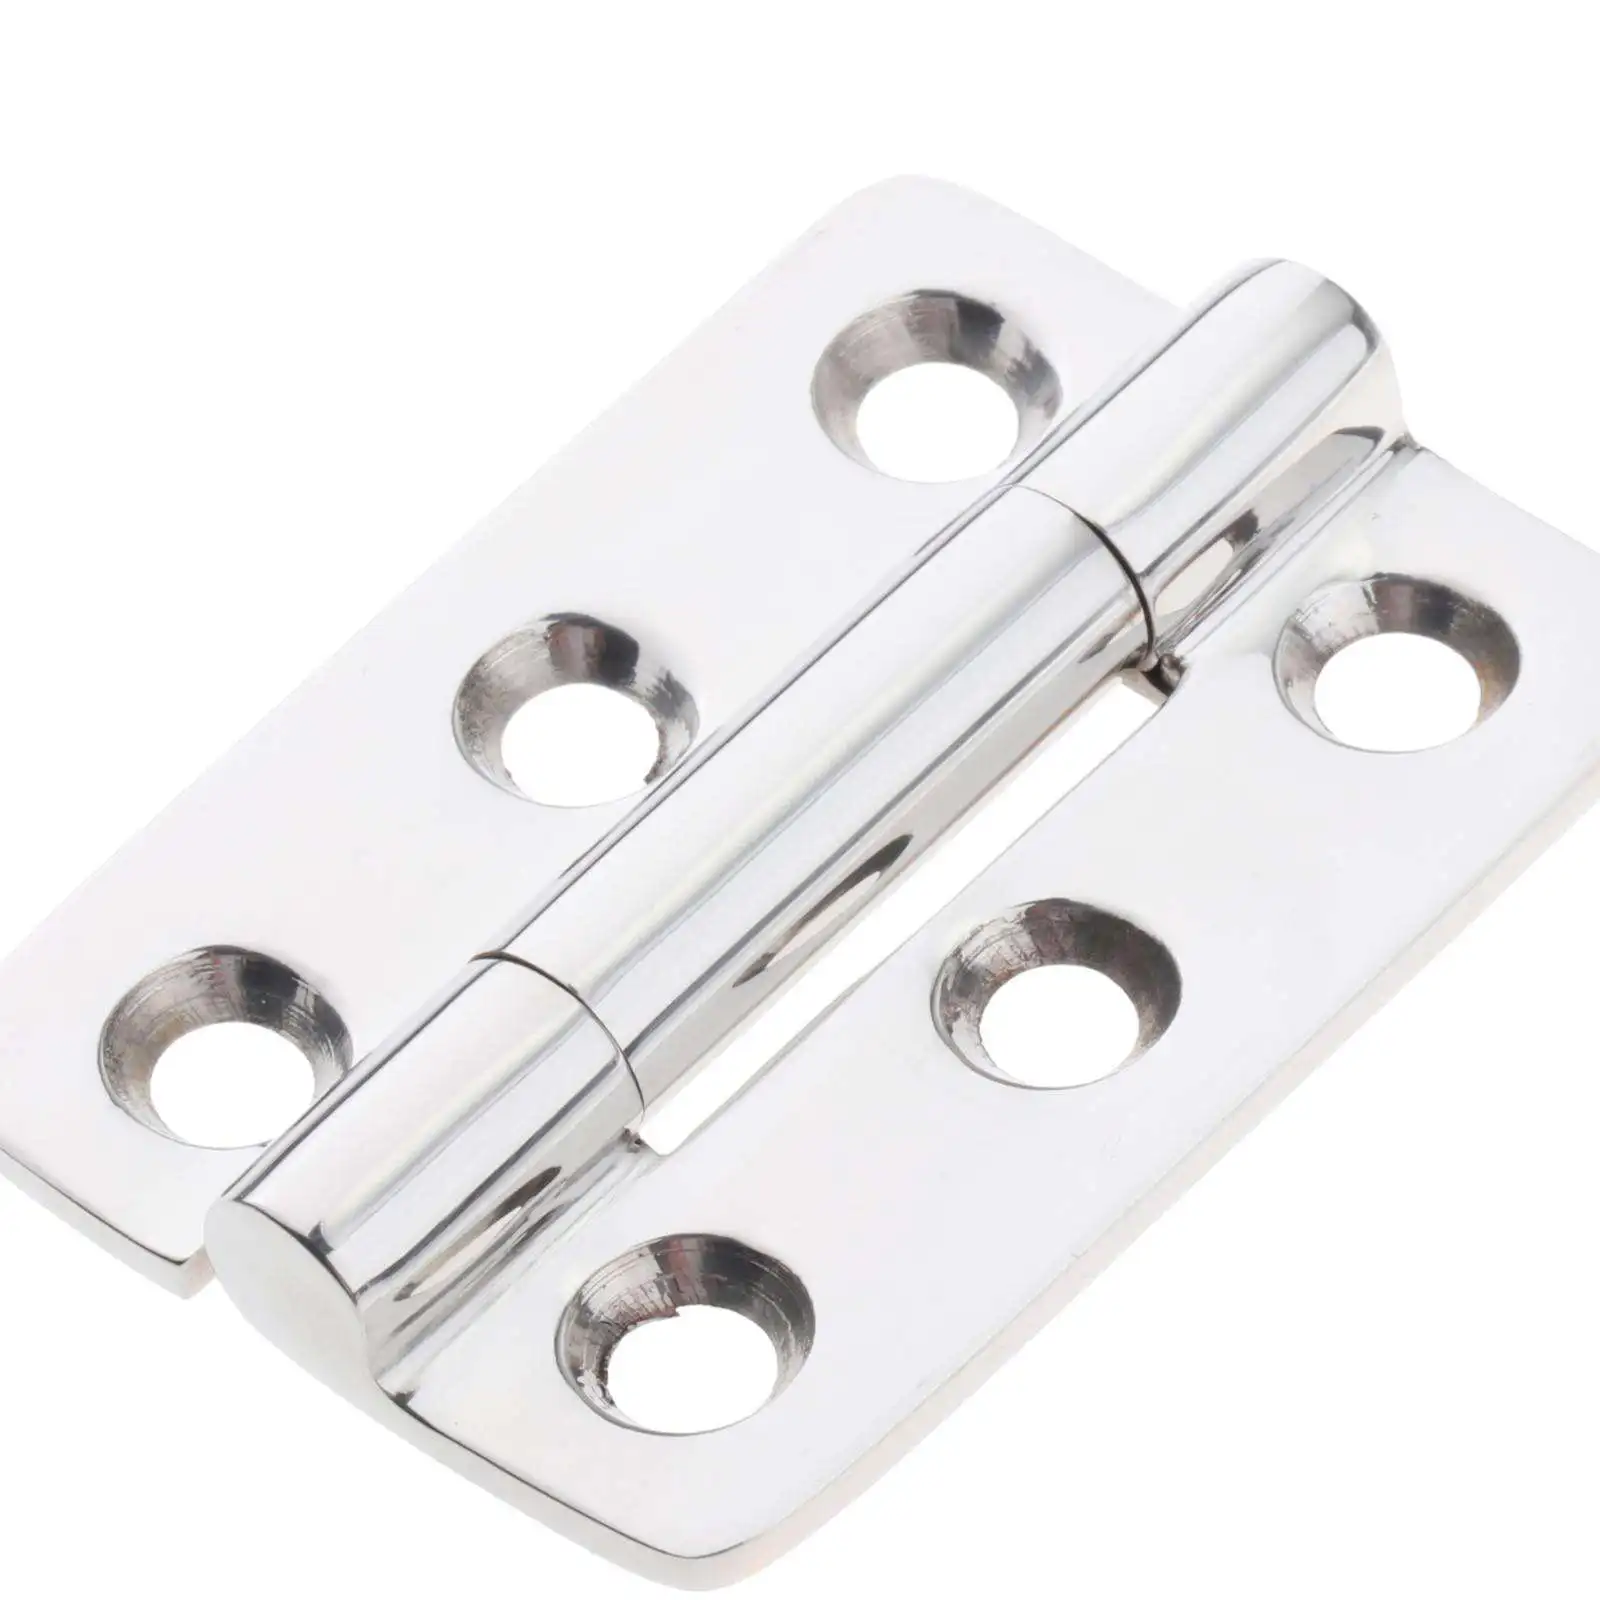 6 Holes Marine Grade Heavy Duty Stainless Steel Polished Marine Boat Yacht Hinges Universal for Cabinet Door Hardware